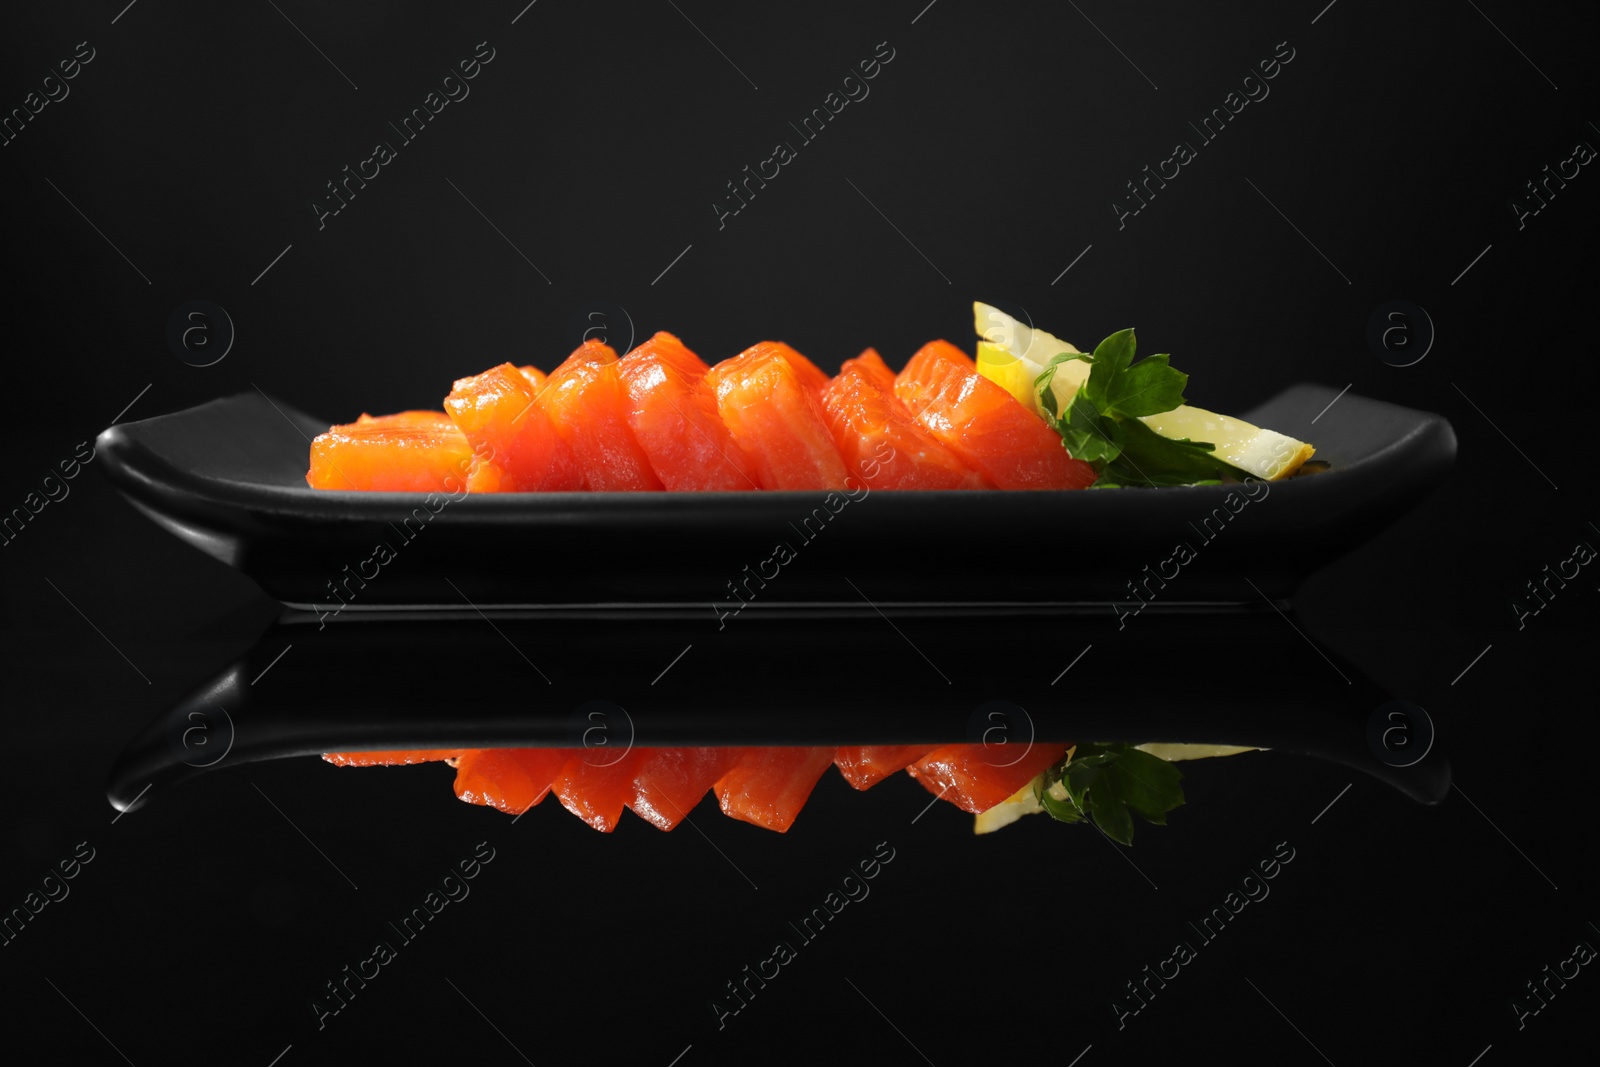 Photo of Delicious salmon sashimi served with lemon and parsley on black mirror surface